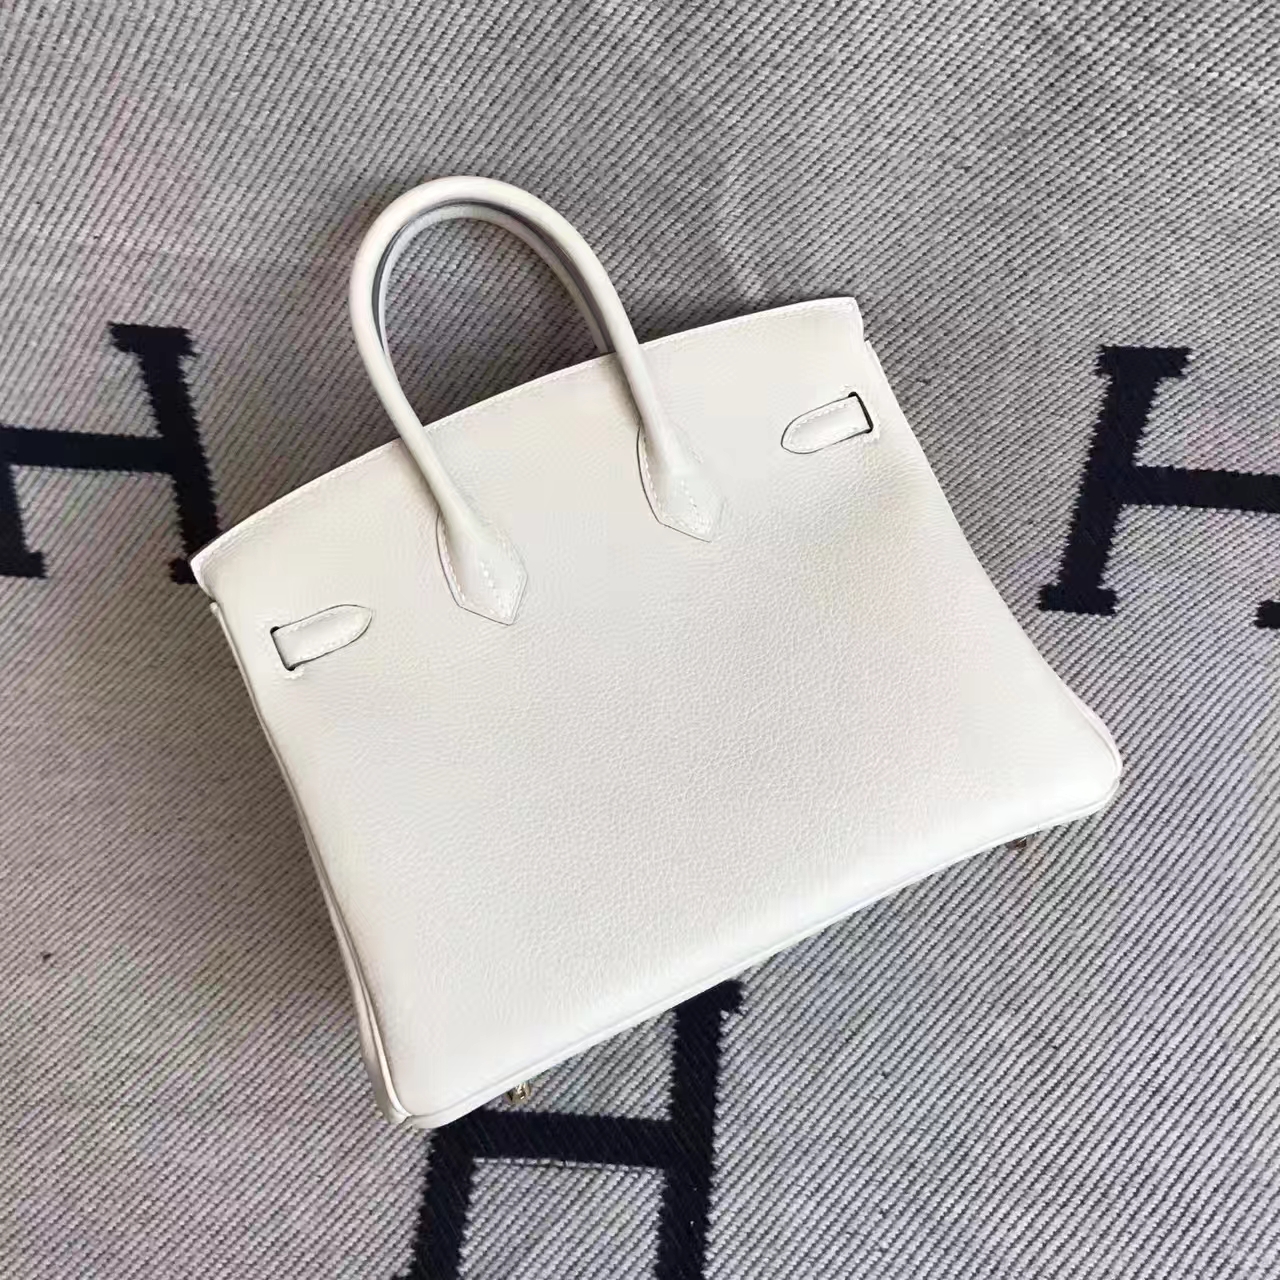 Hand Stitching Hermes Birkin Bag 25cm in CK10 Carie White Togo Leather